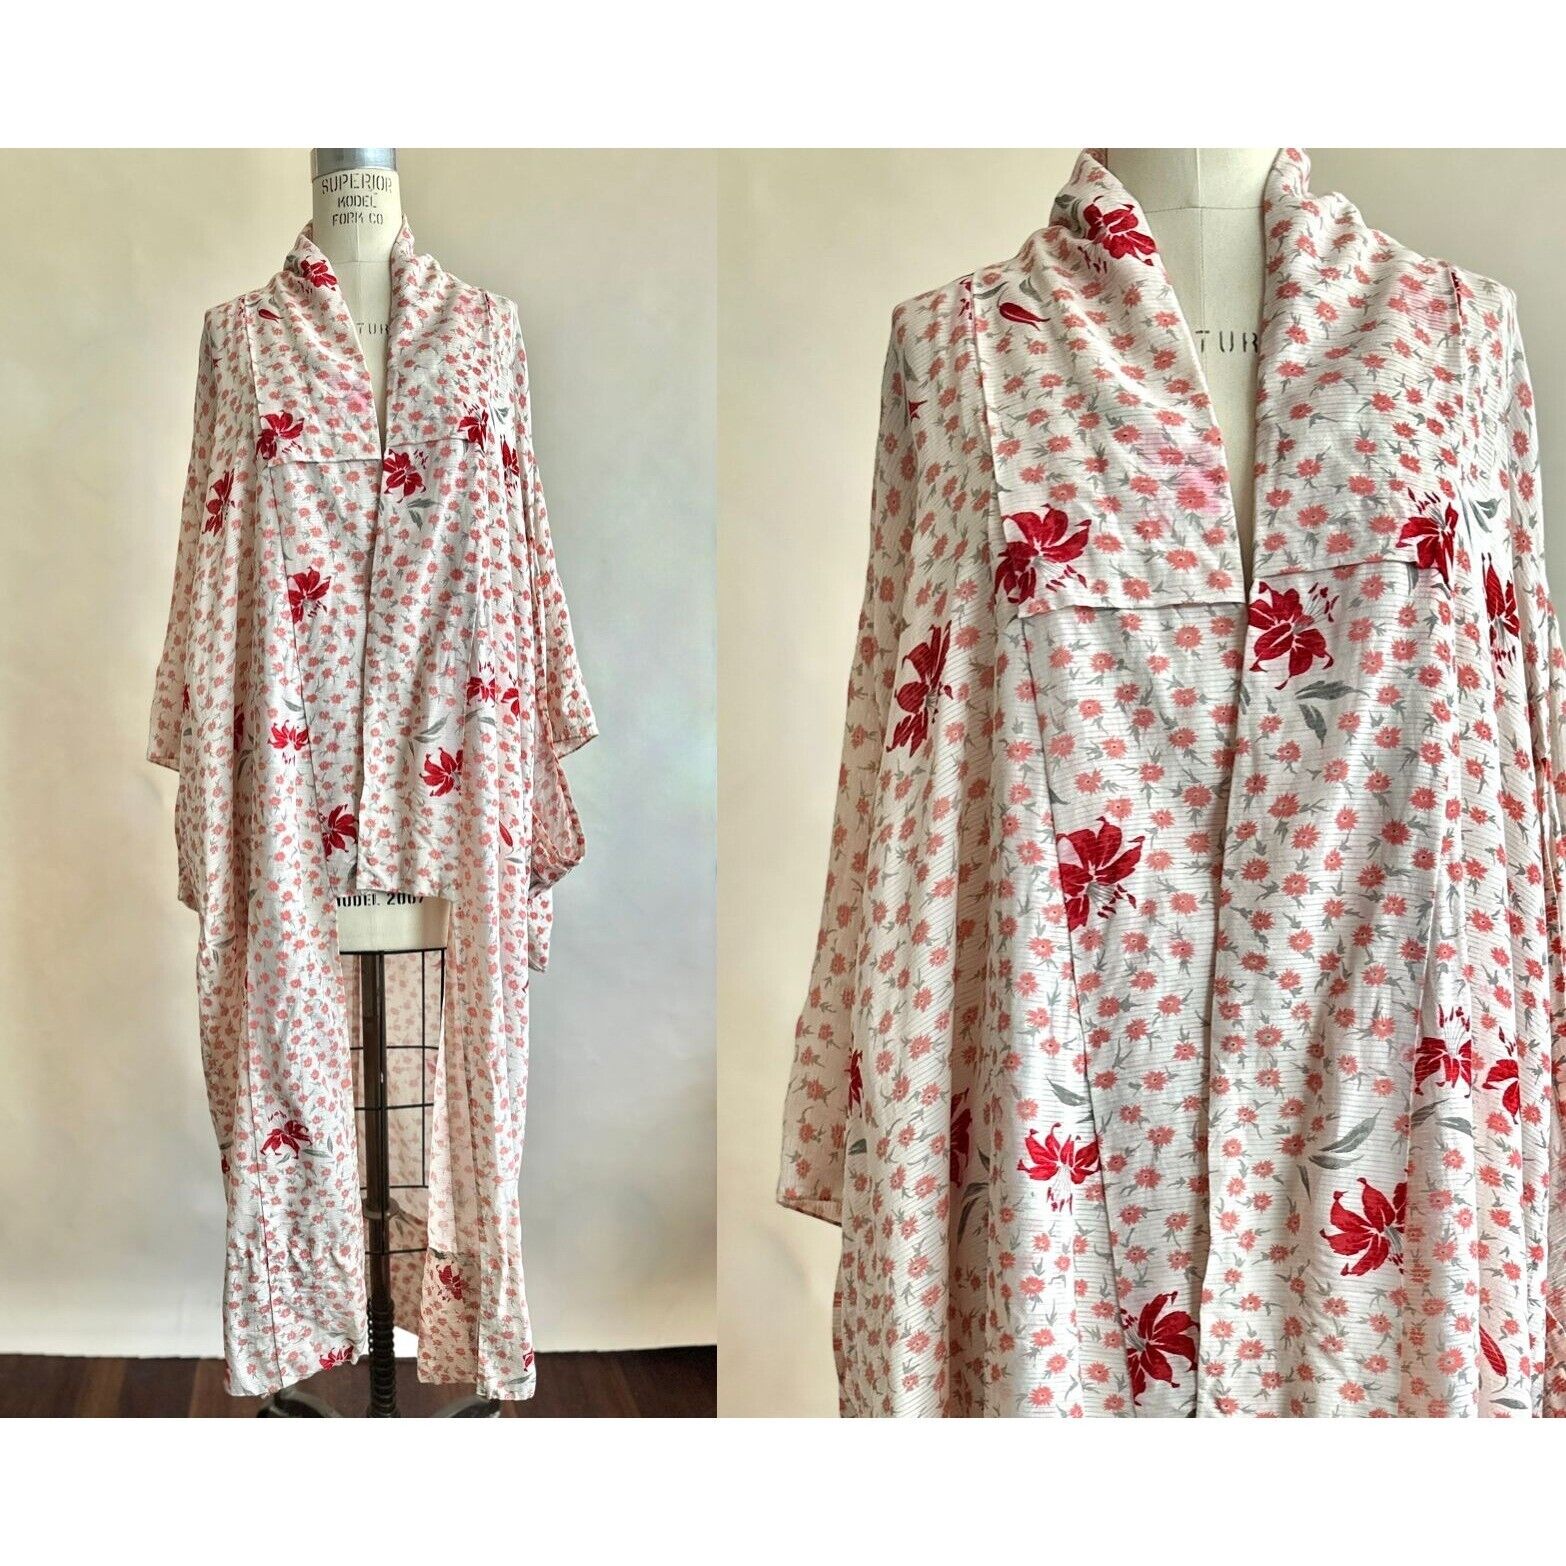 Vintage 1970s Silk Kimono In Red And Cream With Lily Flower Details / Floral